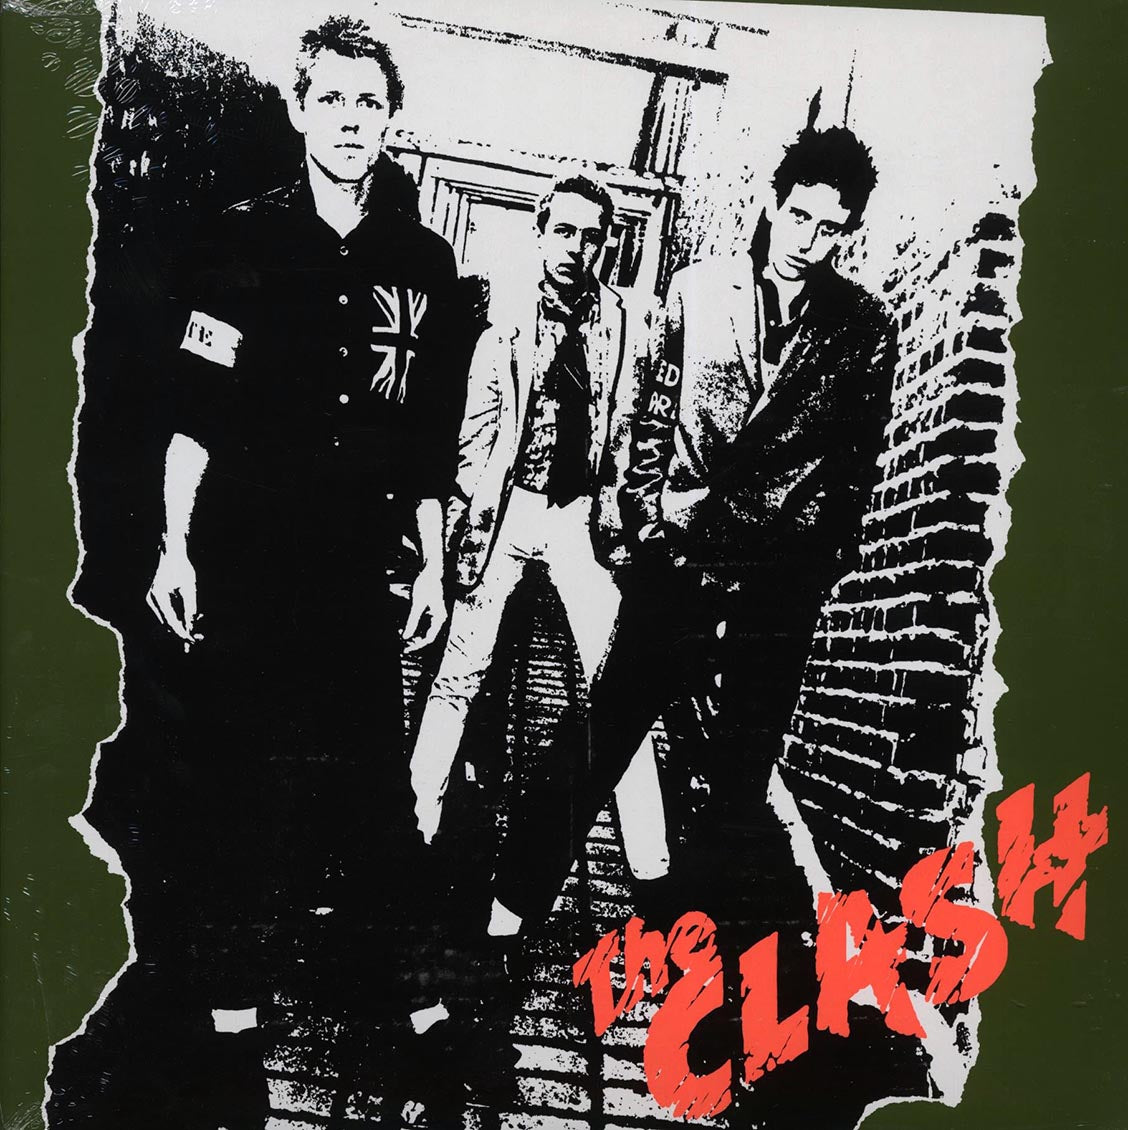 The Clash - The Clash (stereo) (180g) (remastered) - Vinyl LP